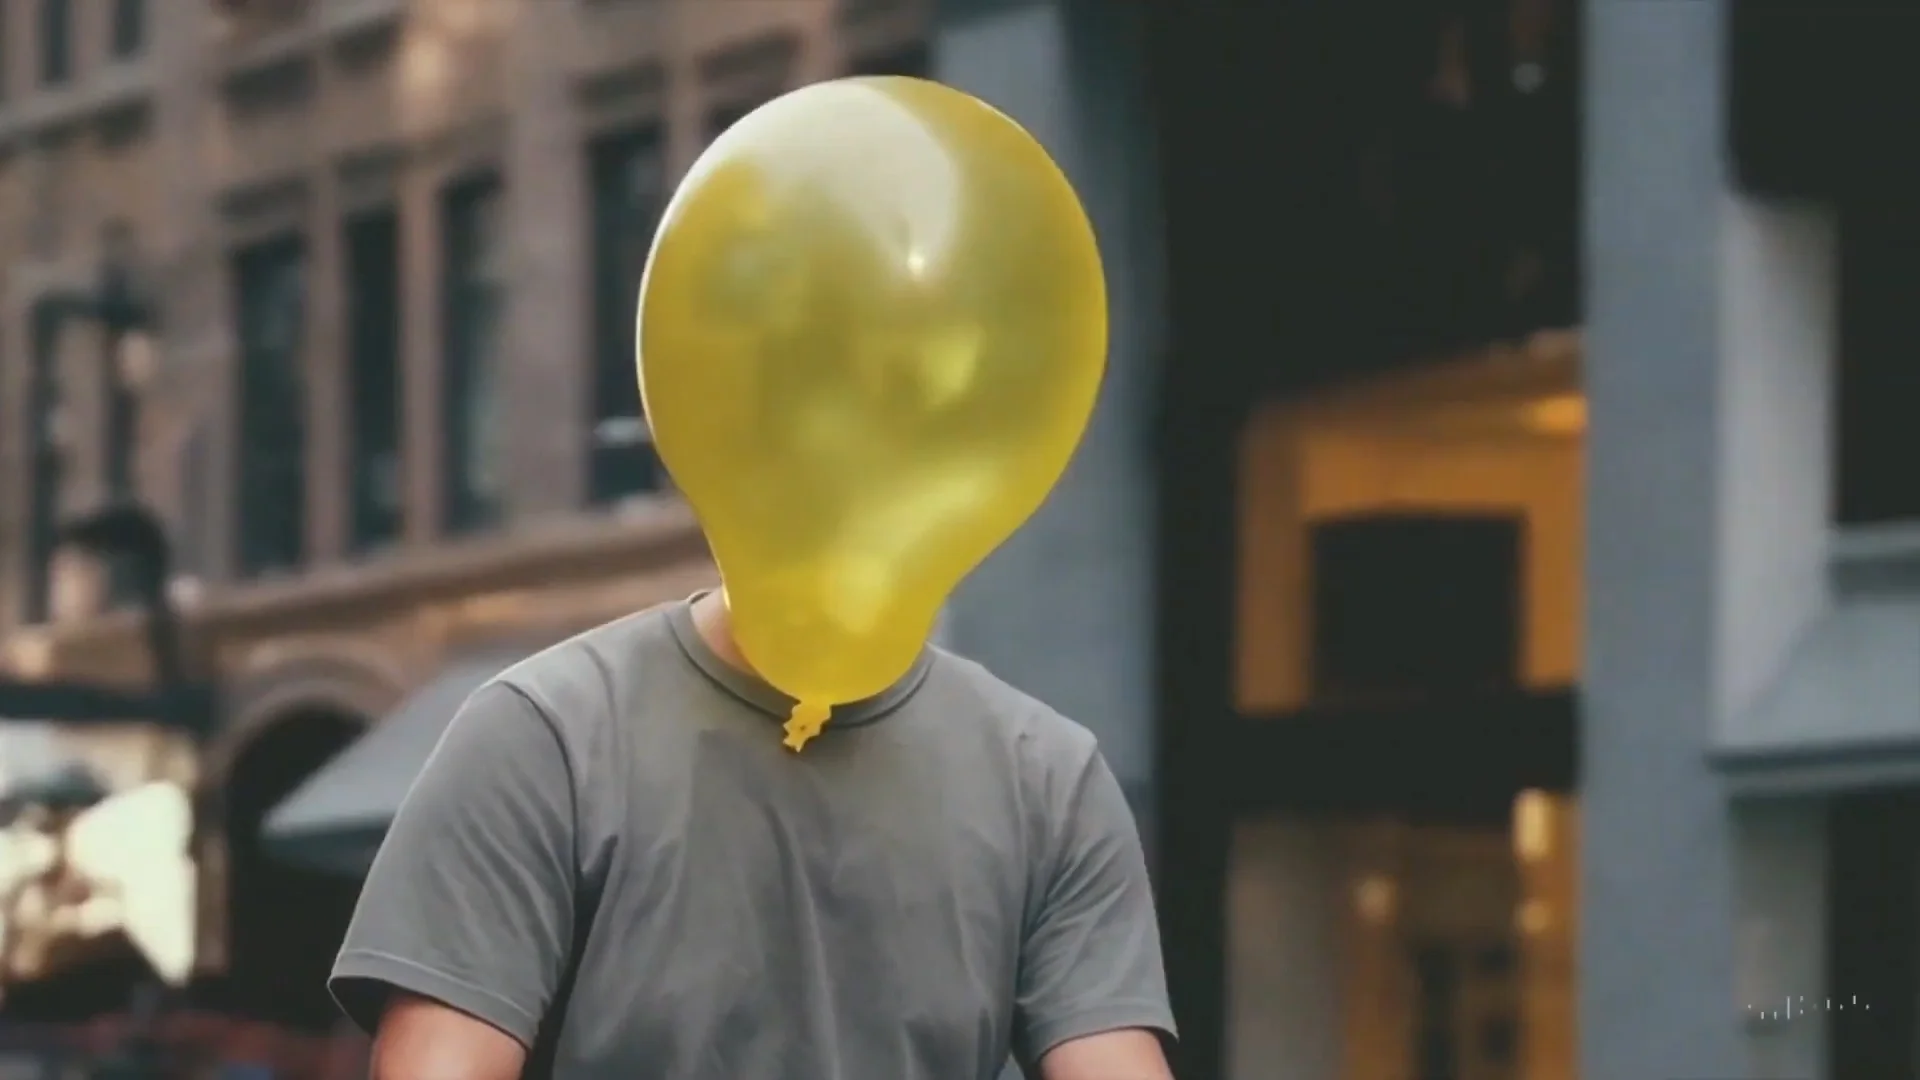 Person with a yellow balloon covering their head standing on an urban street.